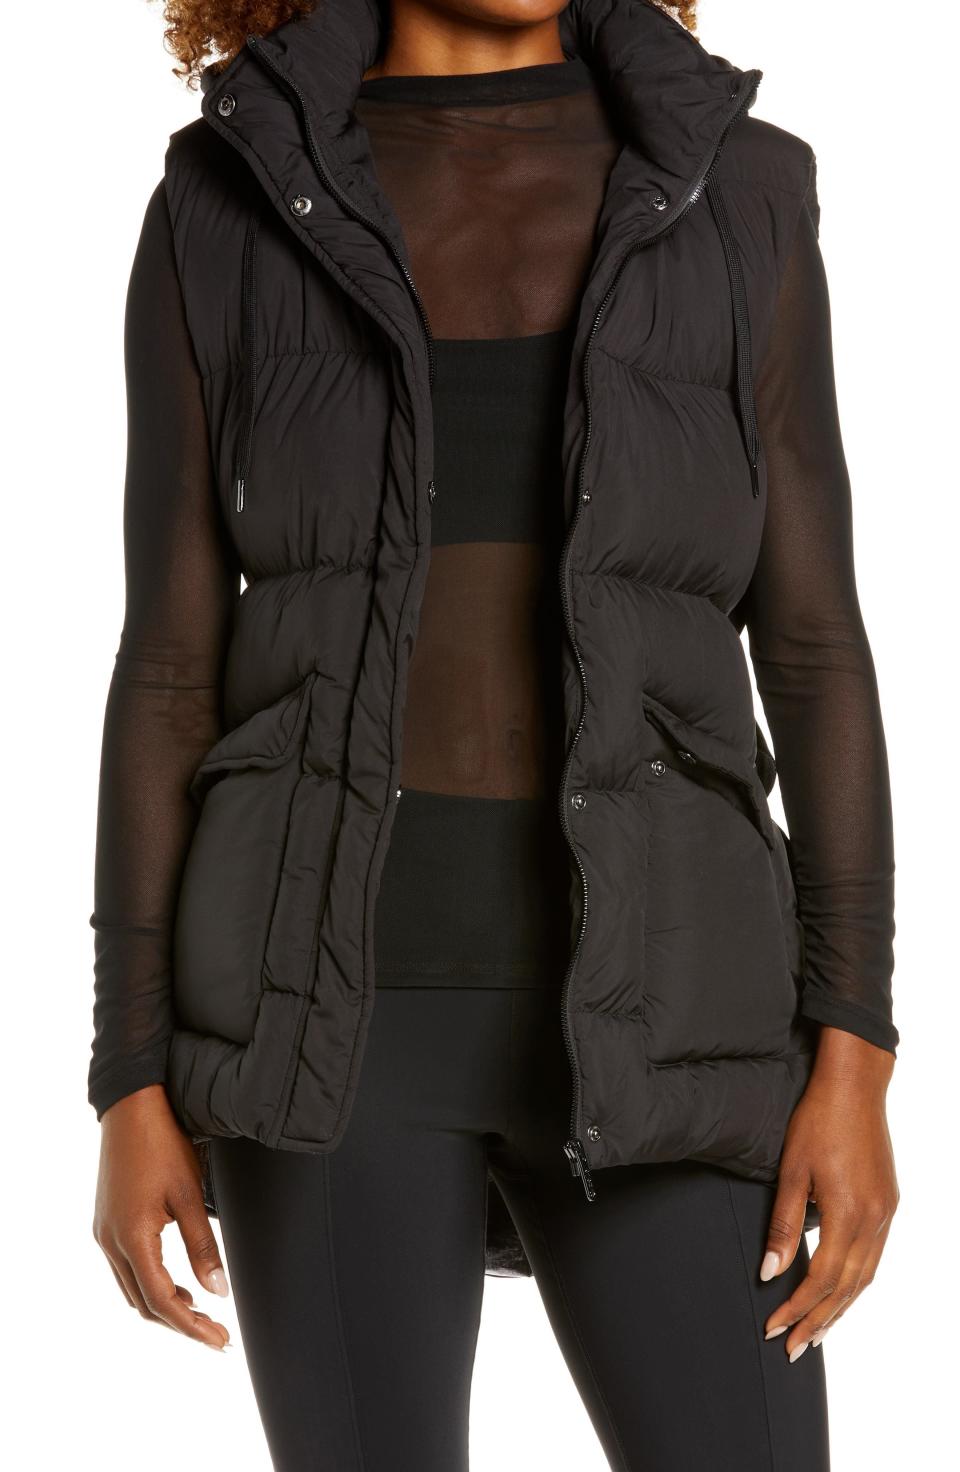 1) Zella Recycled Polyester Puffer Vest, Size Xx-Small in Black at Nordstrom